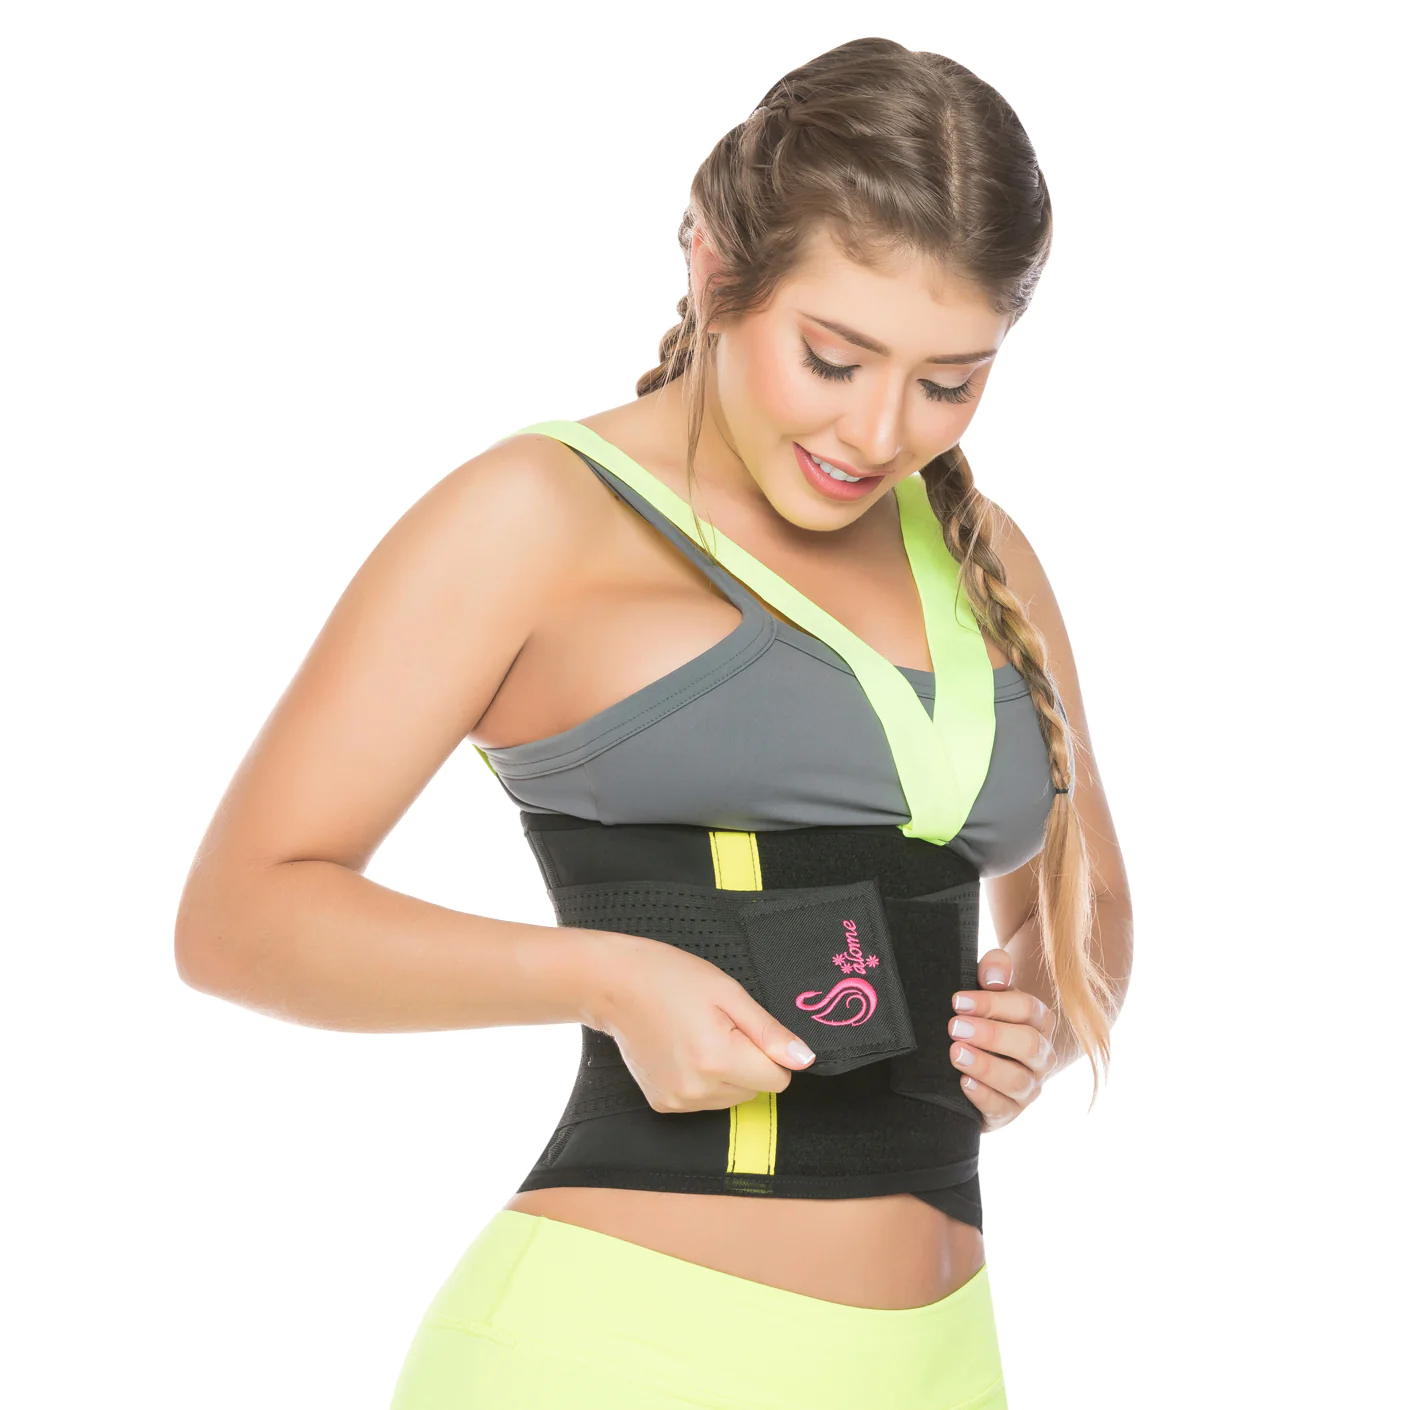 Buy Salome Latex and Sports Waist Trainers - Productos de Colombia.com